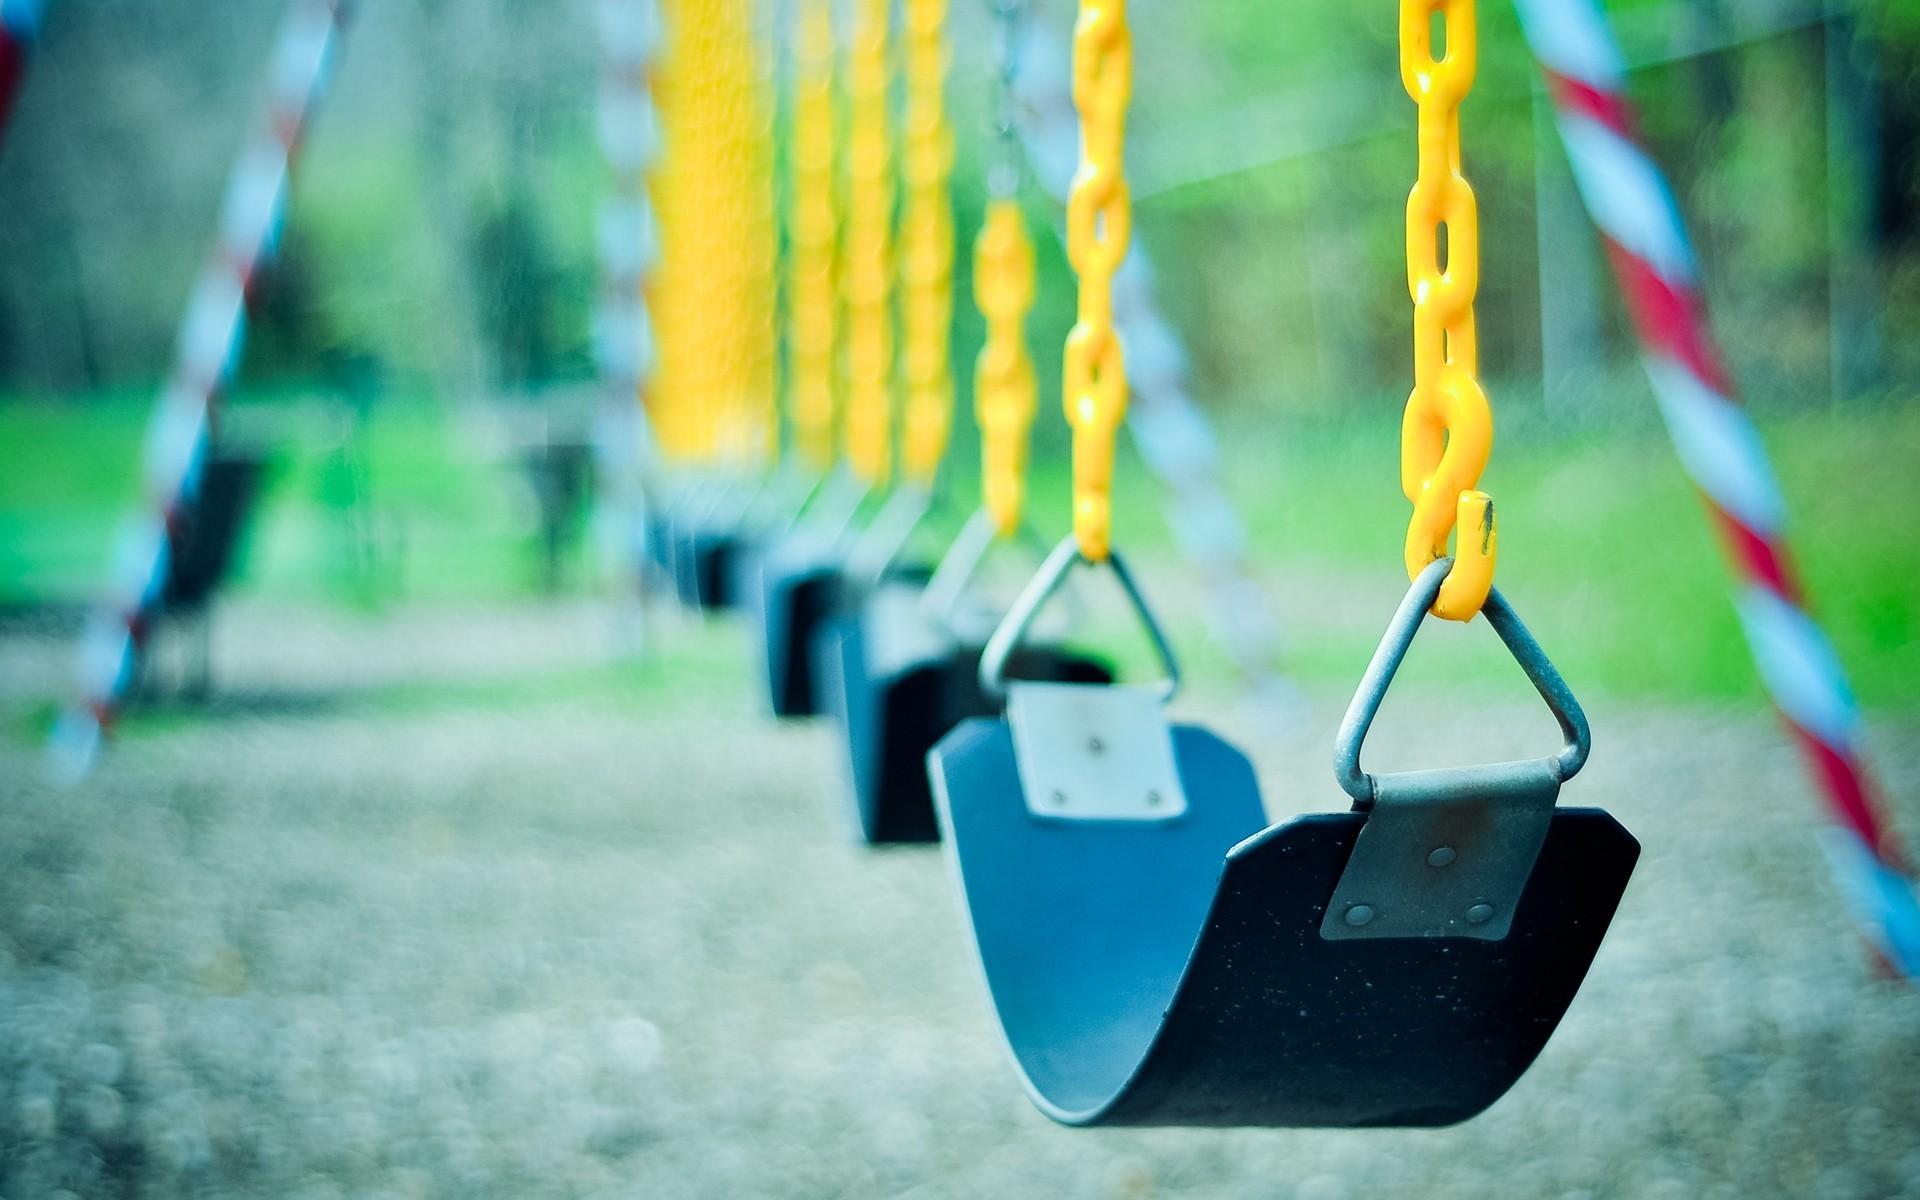 500 Playground Pictures  Download Free Images on Unsplash